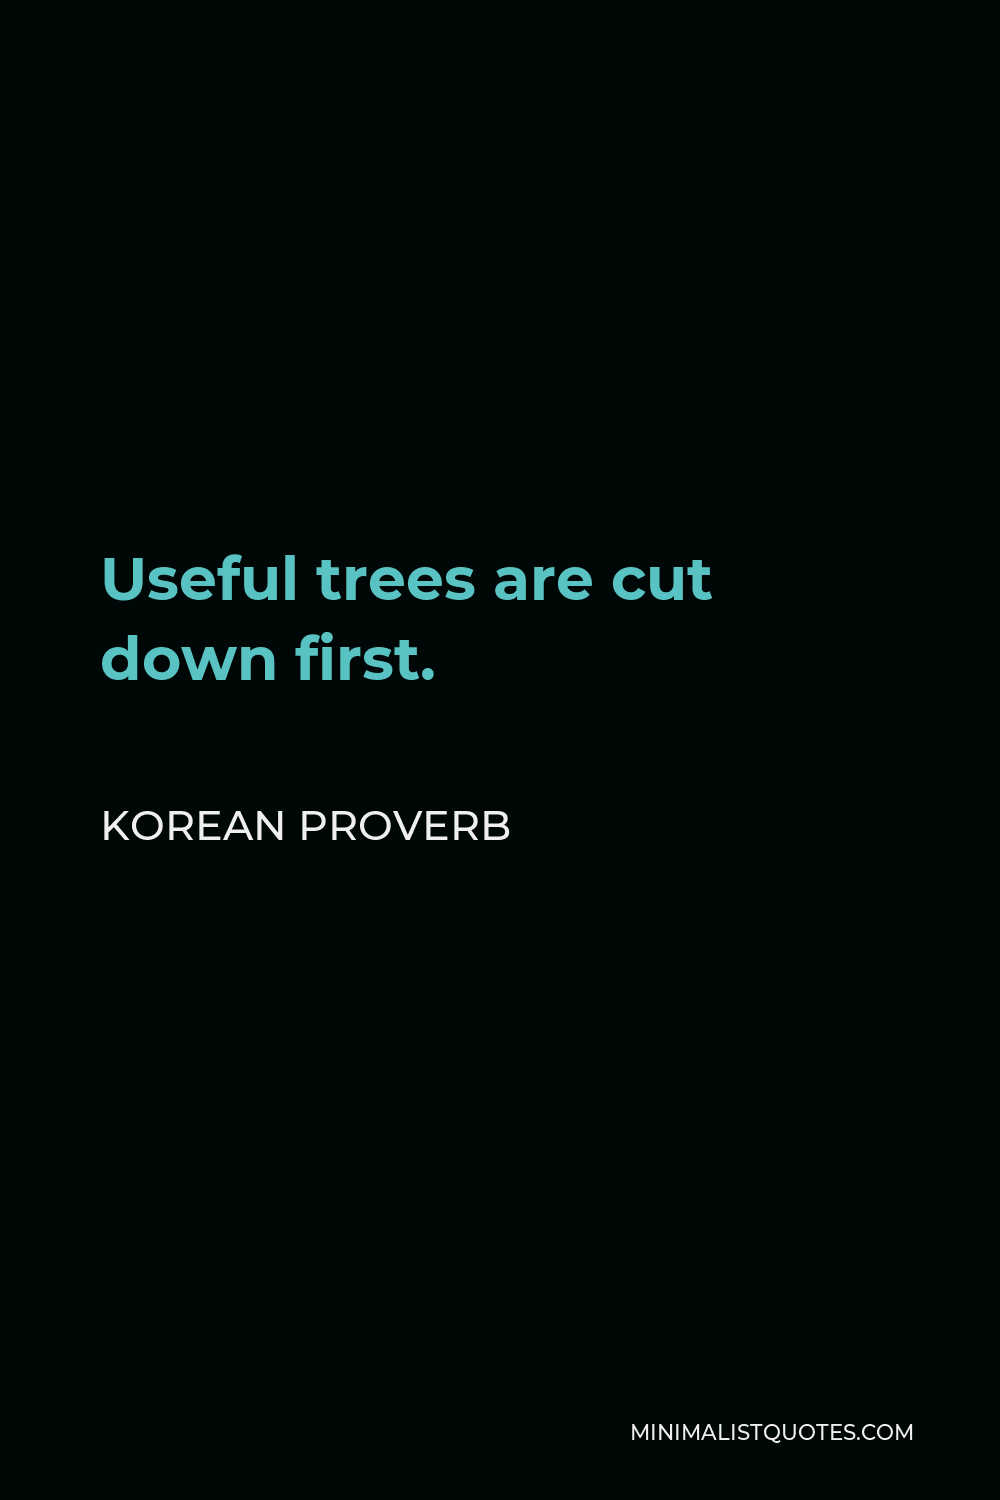 Korean Proverb Quote - Useful trees are cut down first.